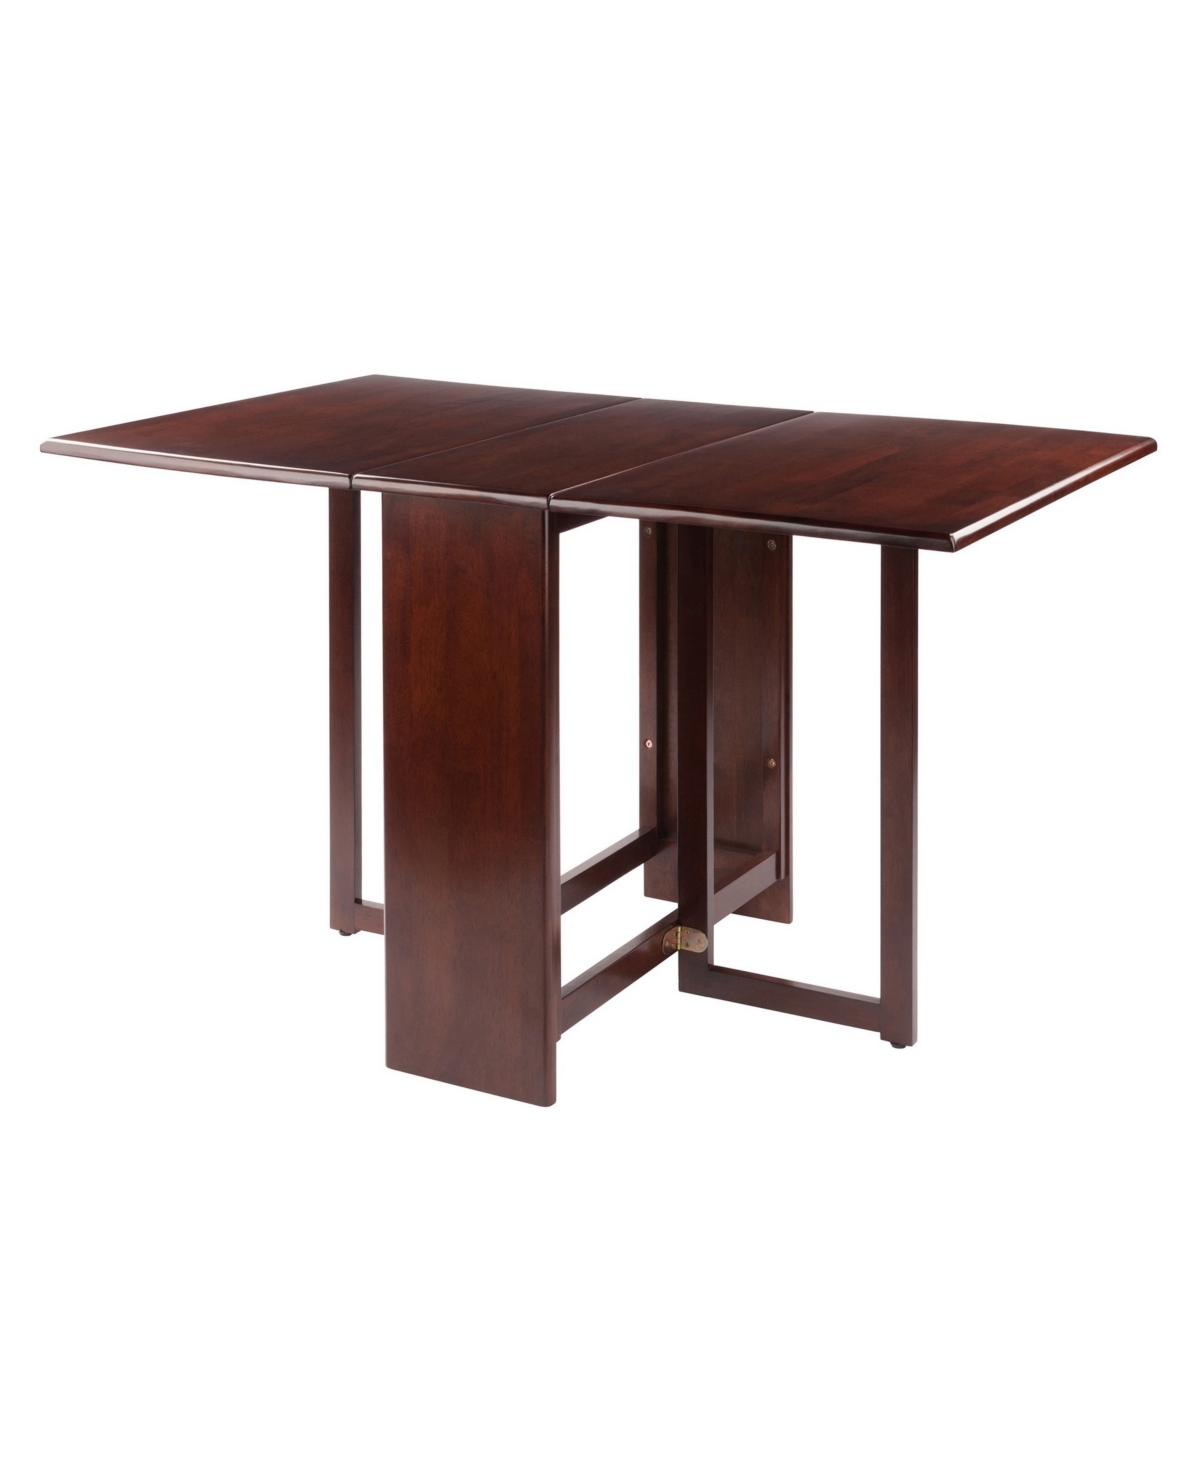 Winsome Clara 29.53" Wood Double Drop Leaf Dining Table In Walnut